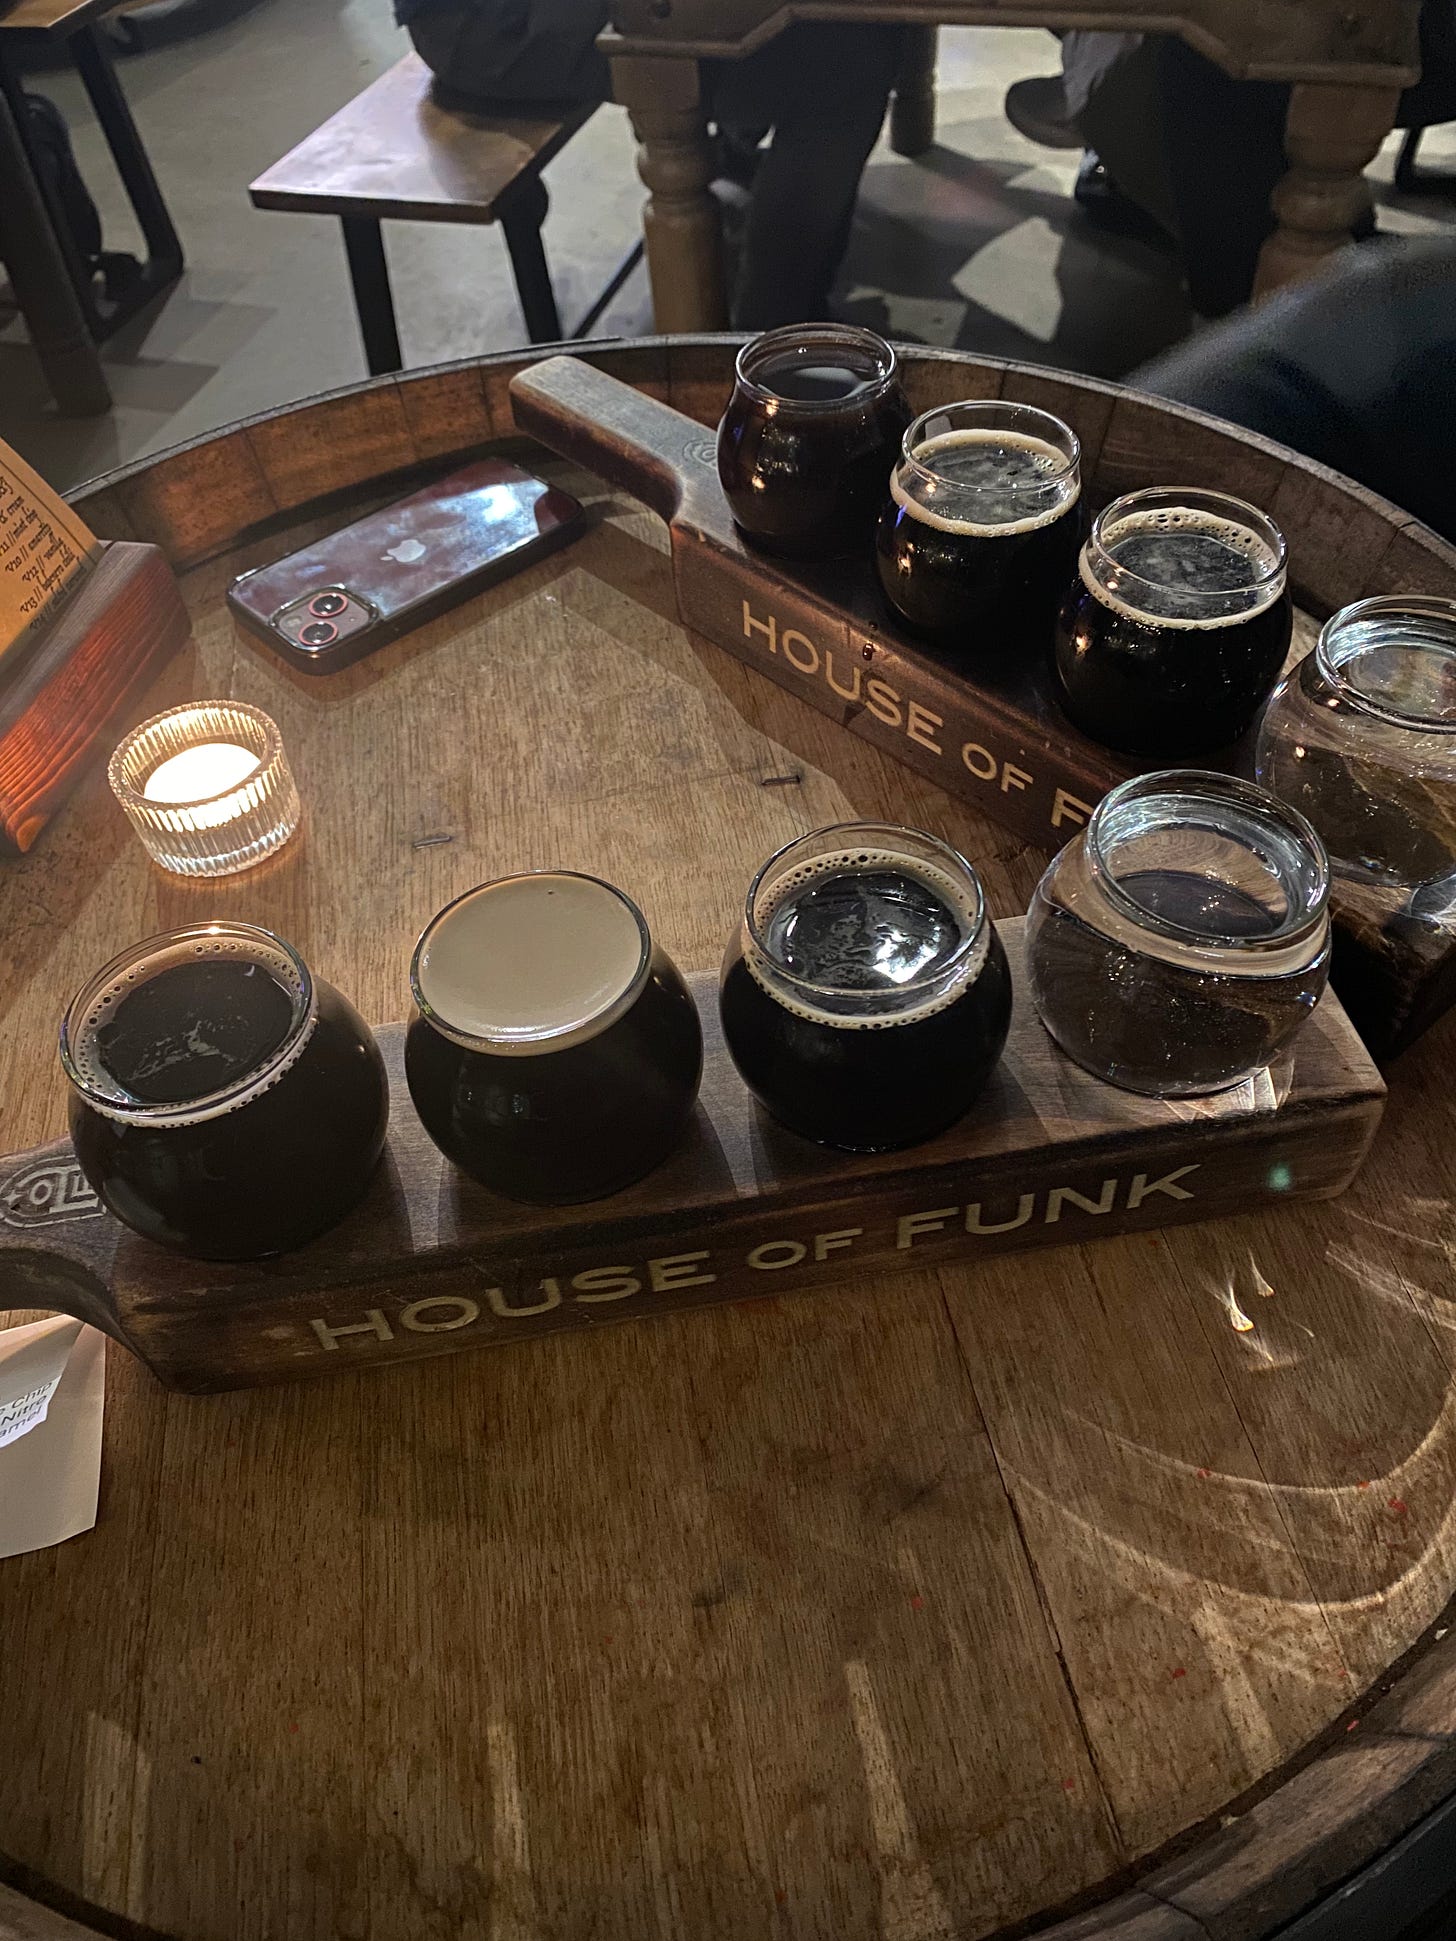 Two wooden beer flight paddles emblazoned with House of Funk lettering, each with a flight of three dark beers and a fourth glass with water. The paddles are on top of a table made from a barrel which has a tealight and a menu in a wooden stand sitting on it. Other tables and benches are visible in the background of the photo.